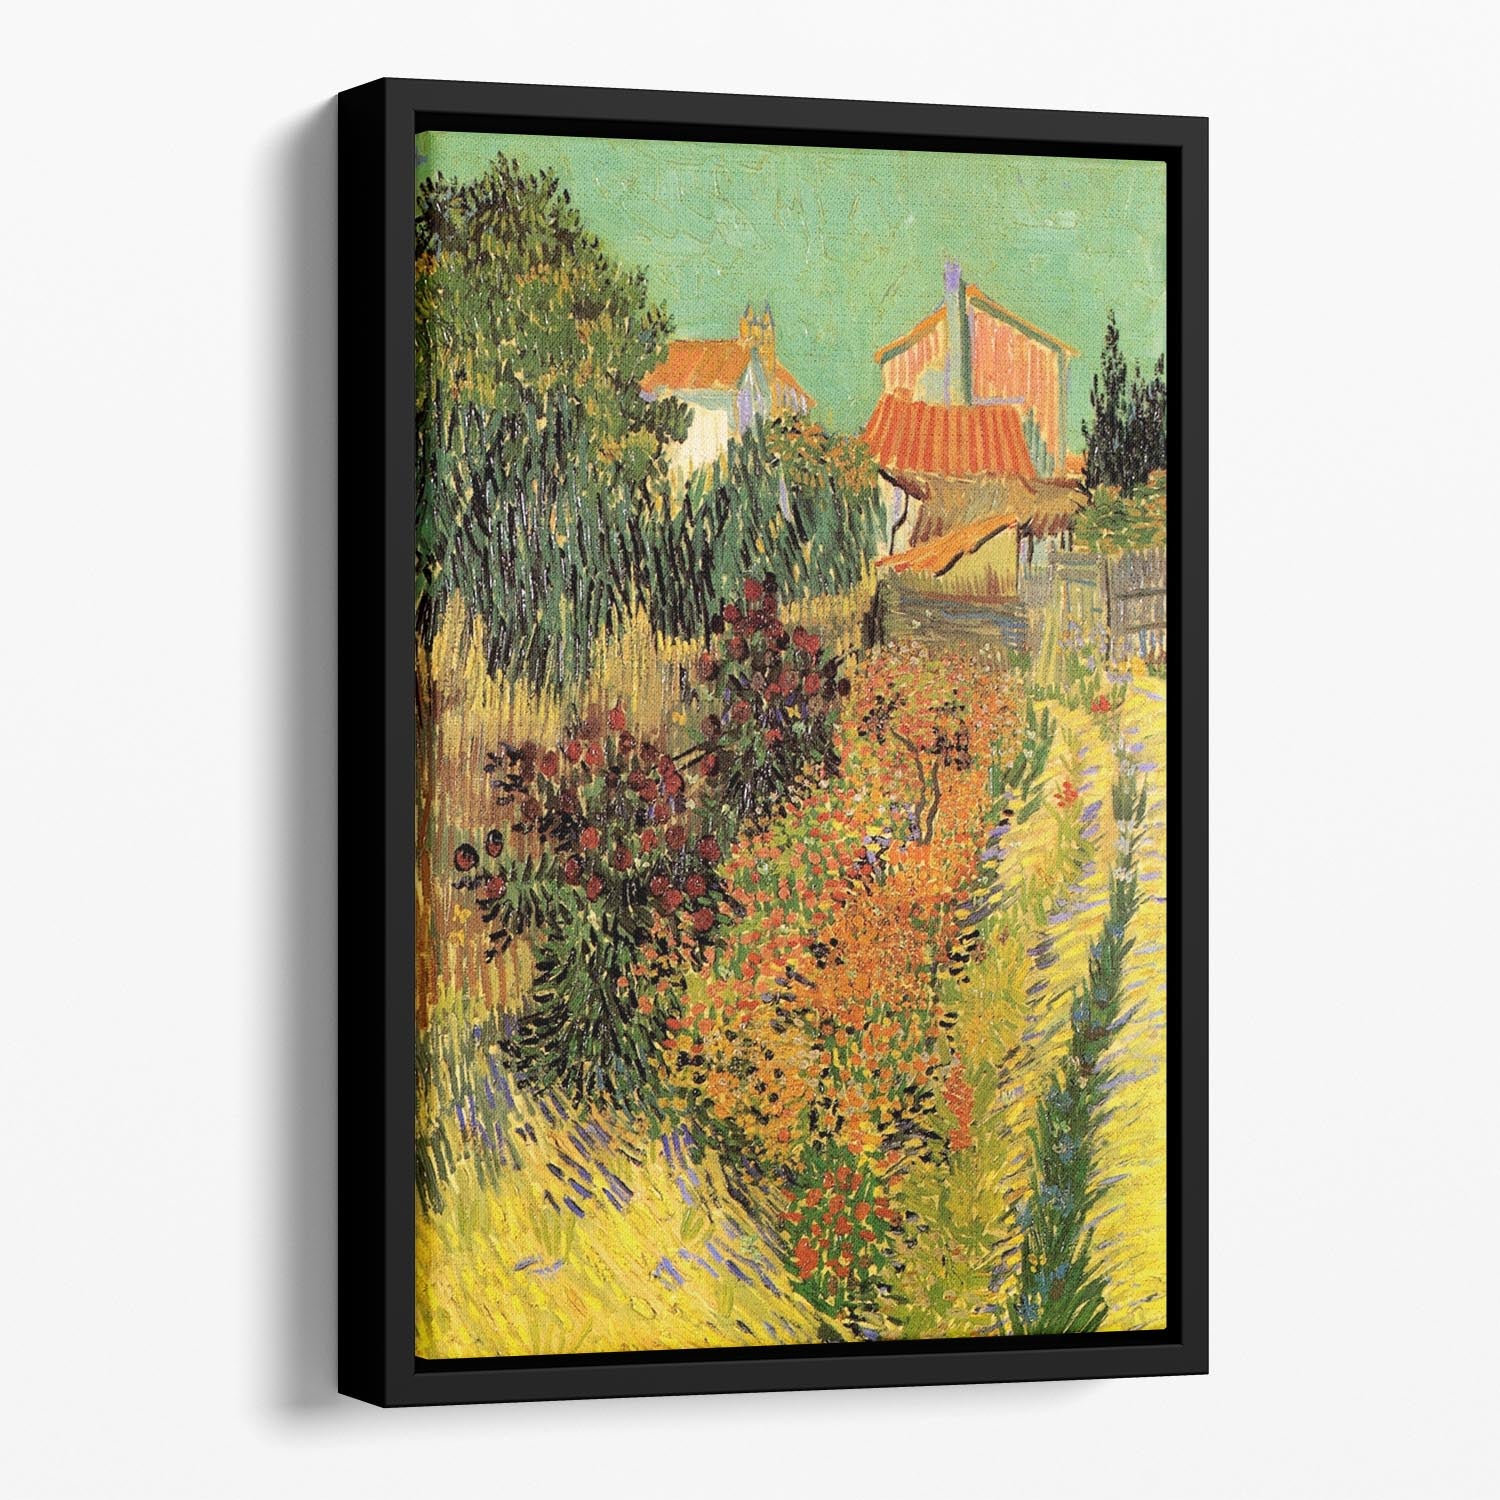 Garden Behind a House by Van Gogh Floating Framed Canvas